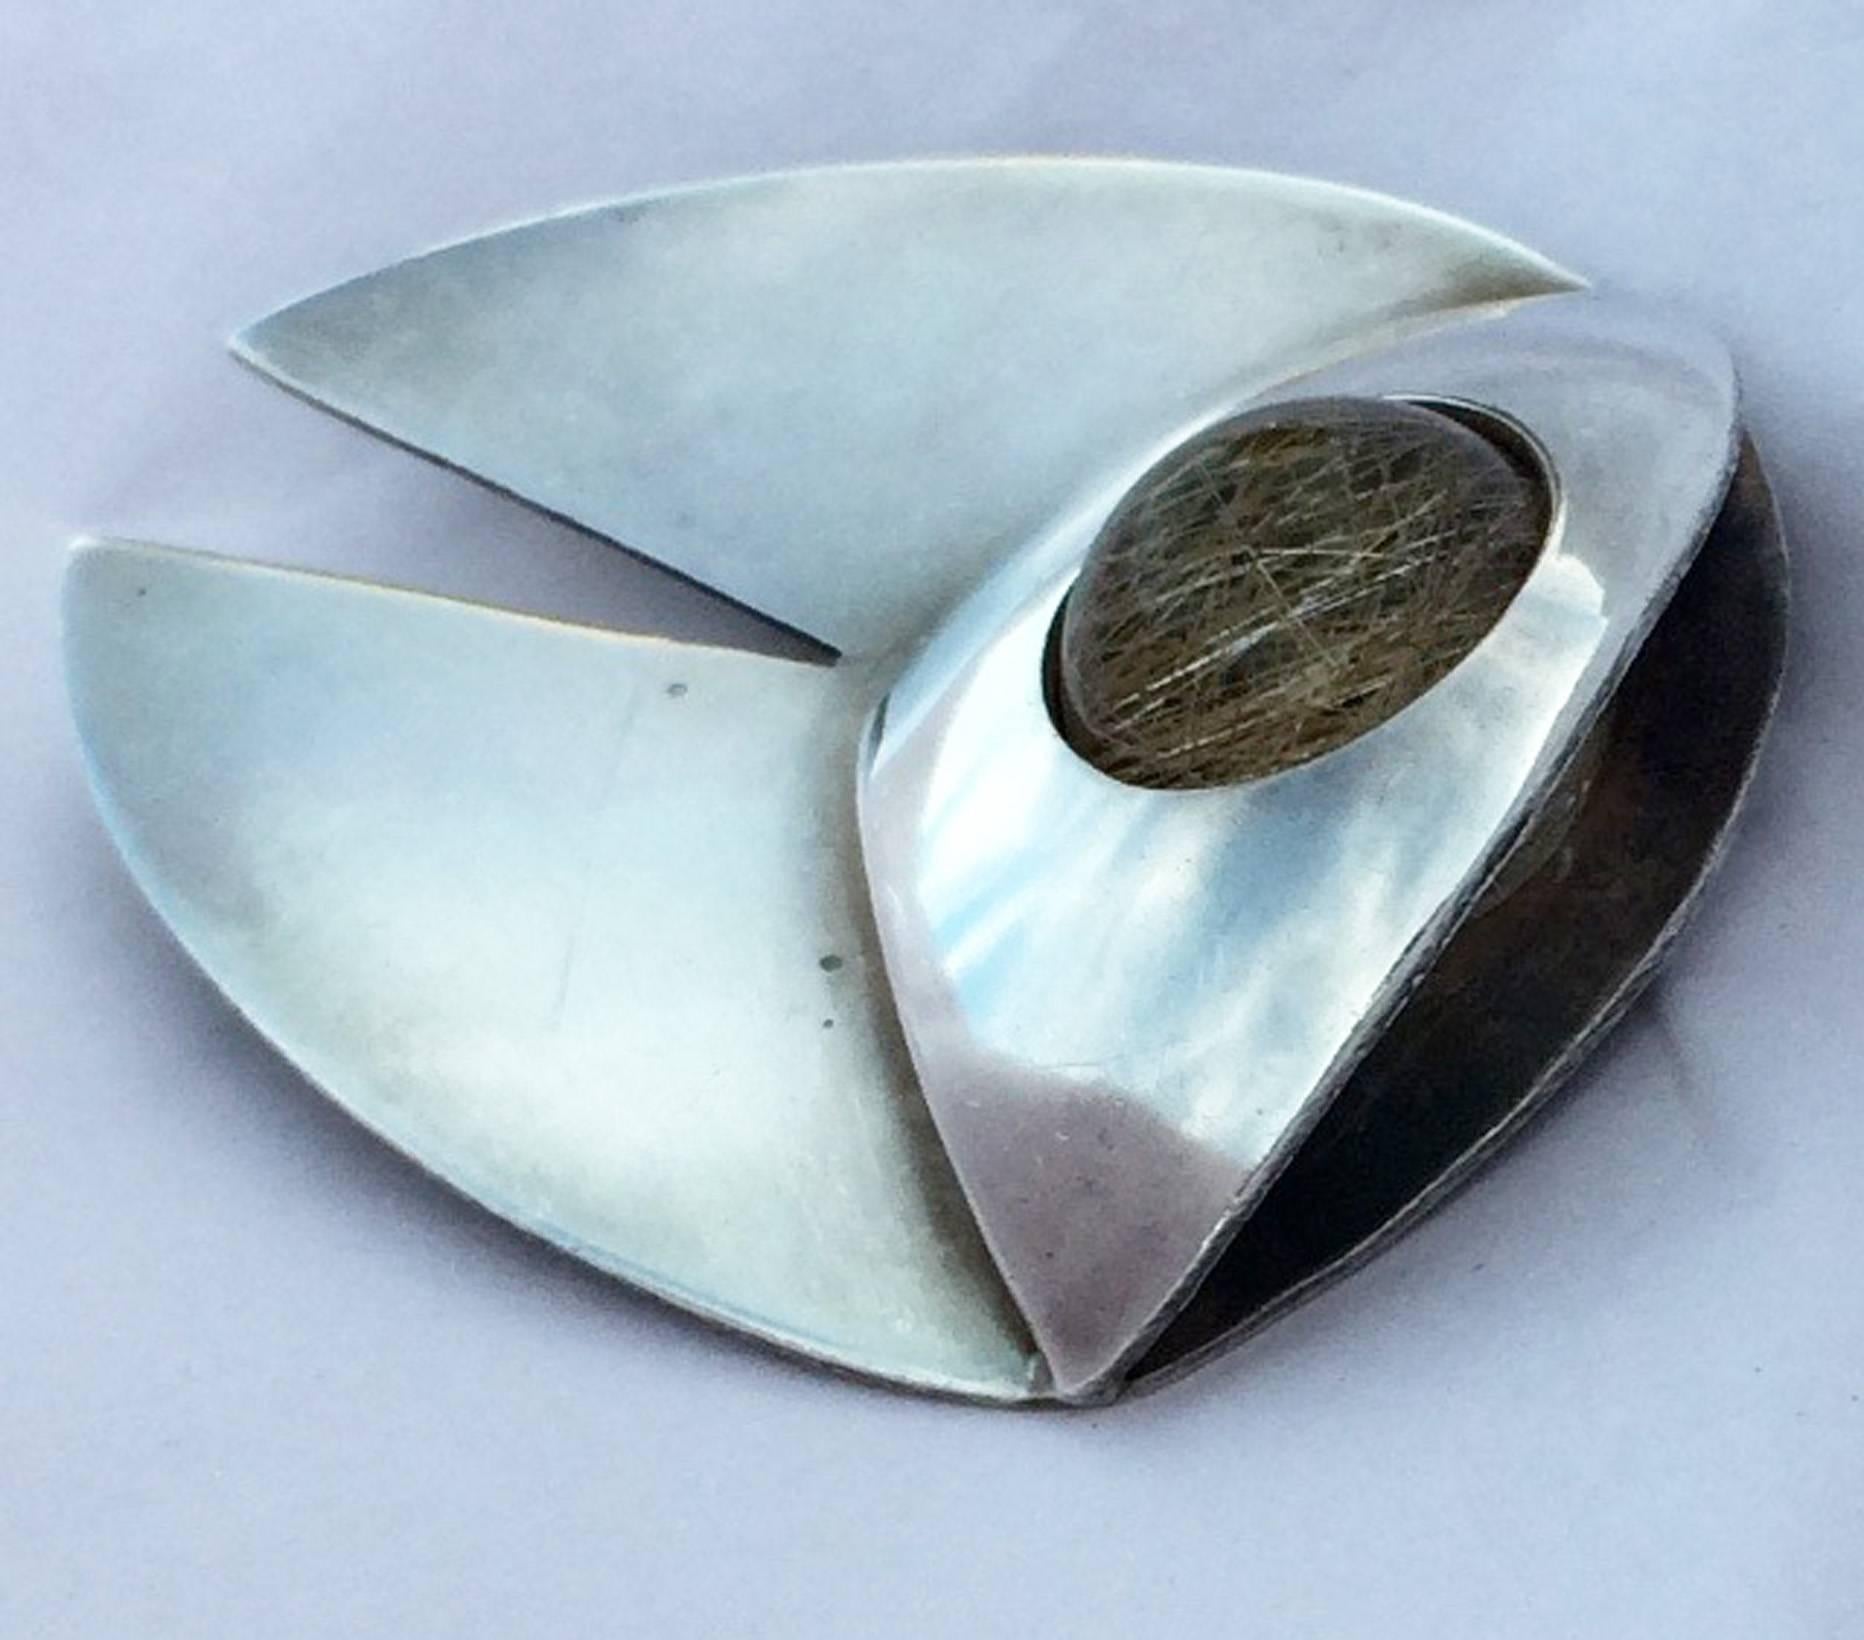 A fine and rare Art Smith modernist sterling brooch. Signed item features a polished round rutilated quartz stone. Original pin back intact. Outstanding three dimensional design and execution.